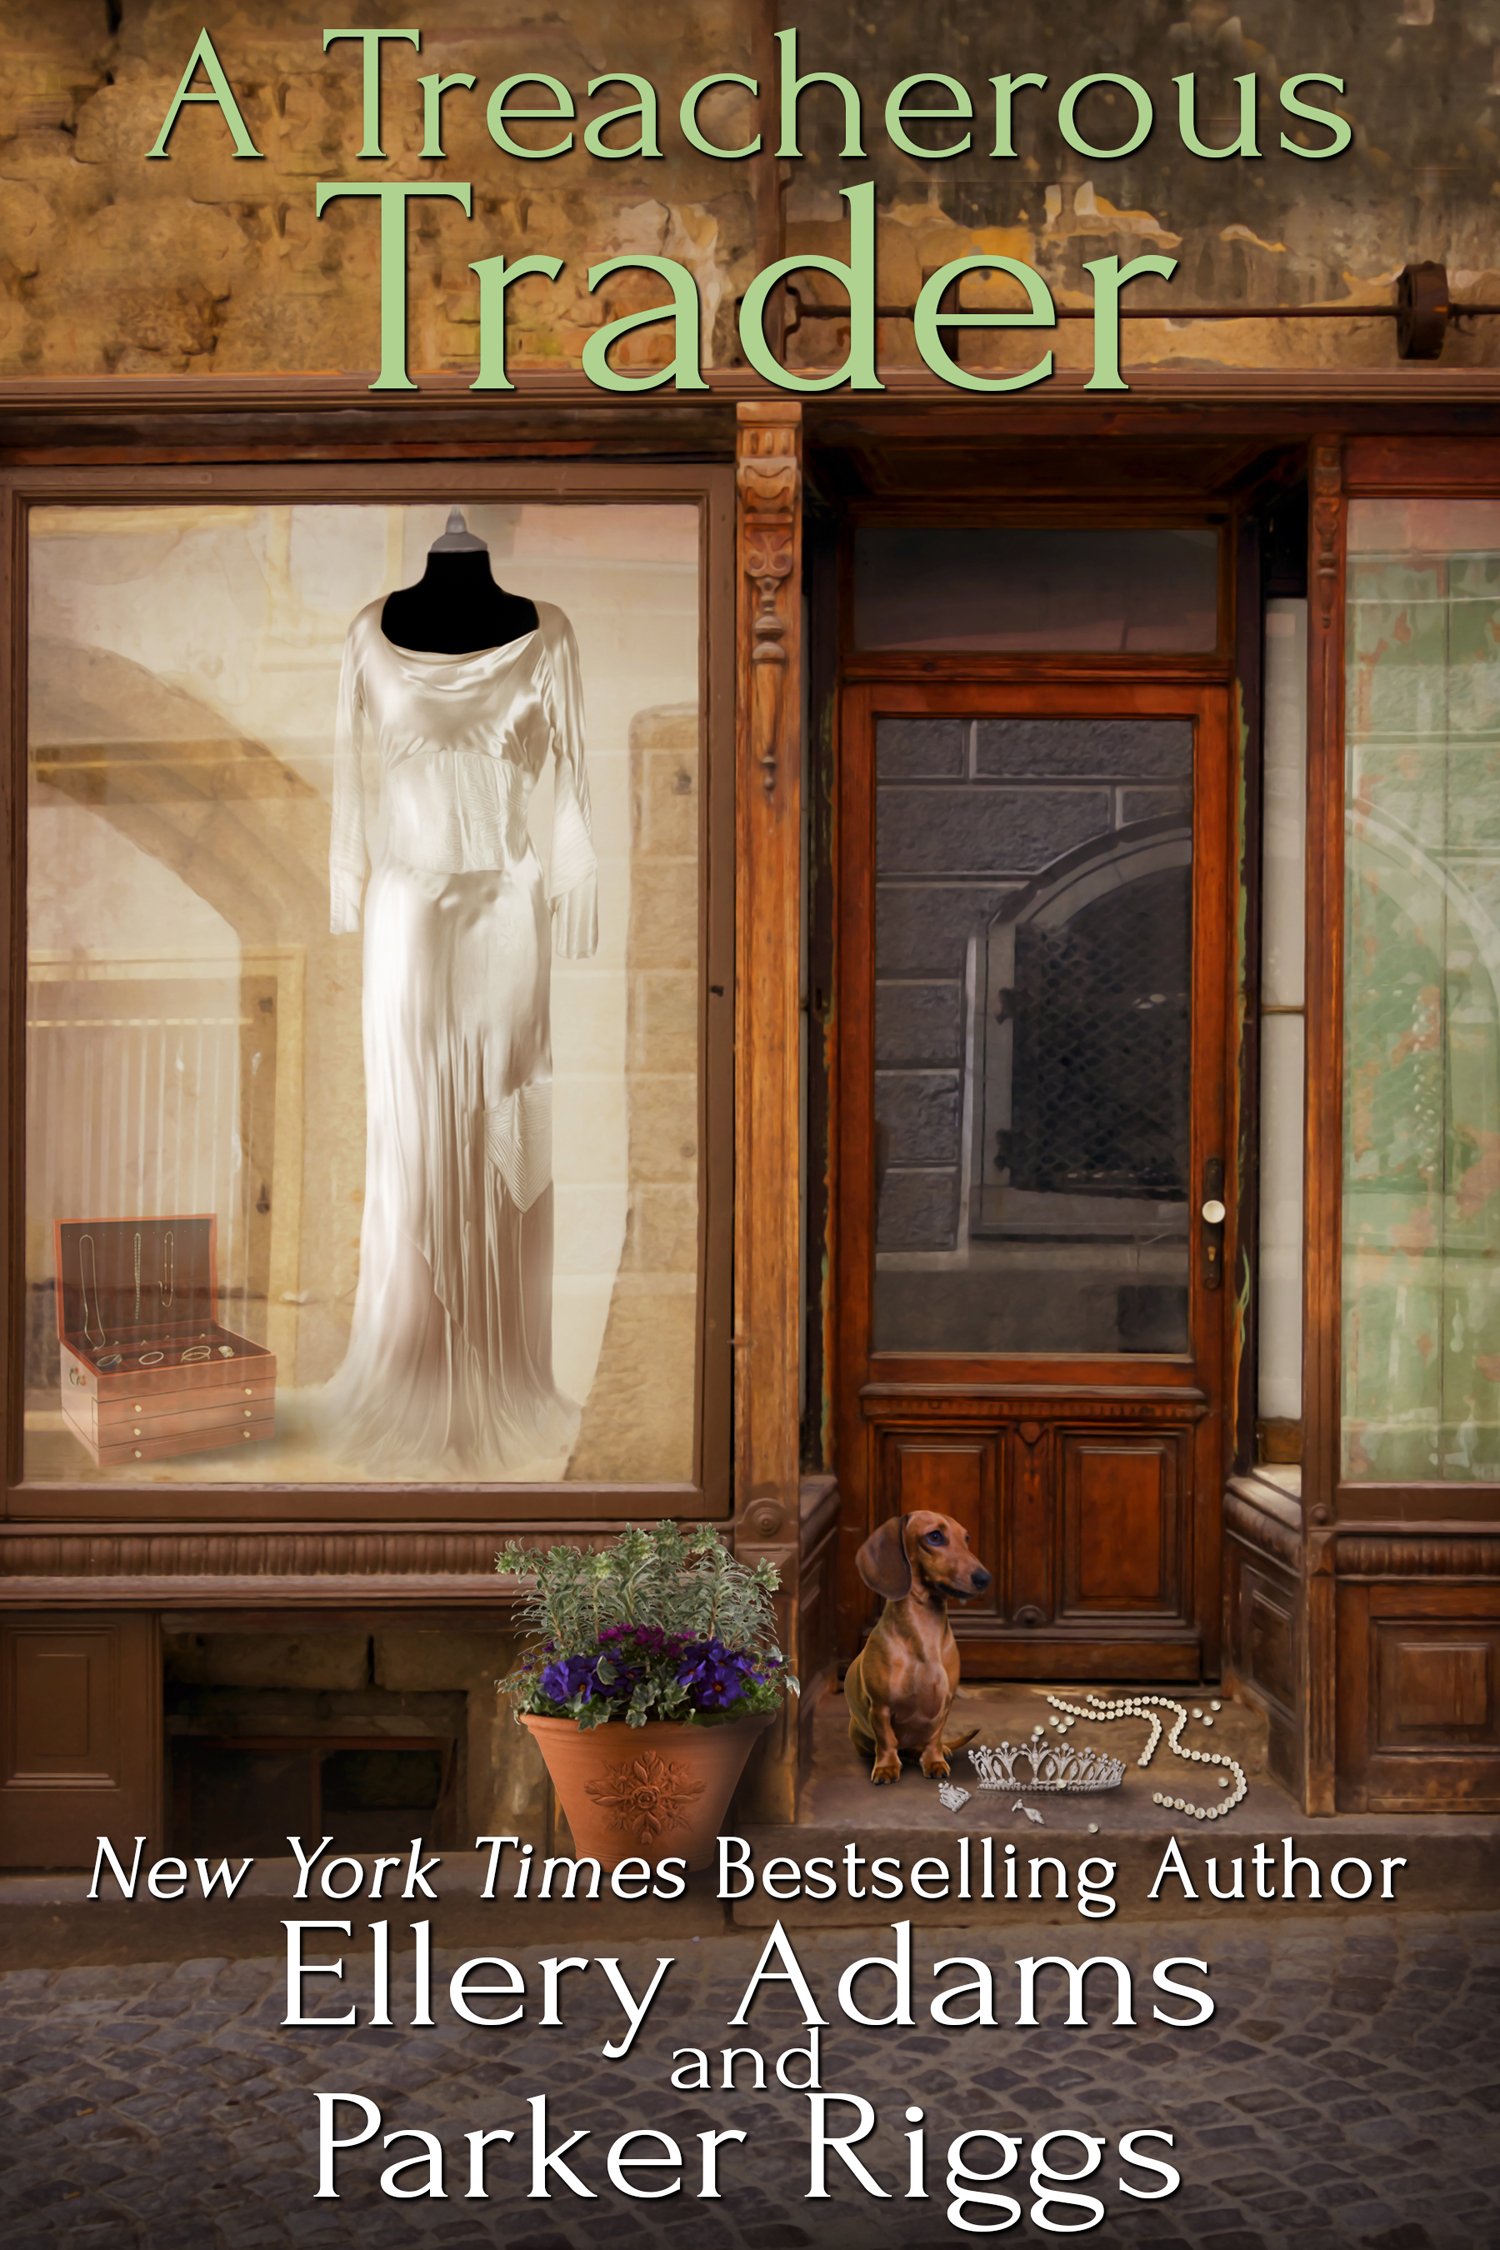 A Treacherous Trader (Antiques & Collectibles Mysteries Book 4)